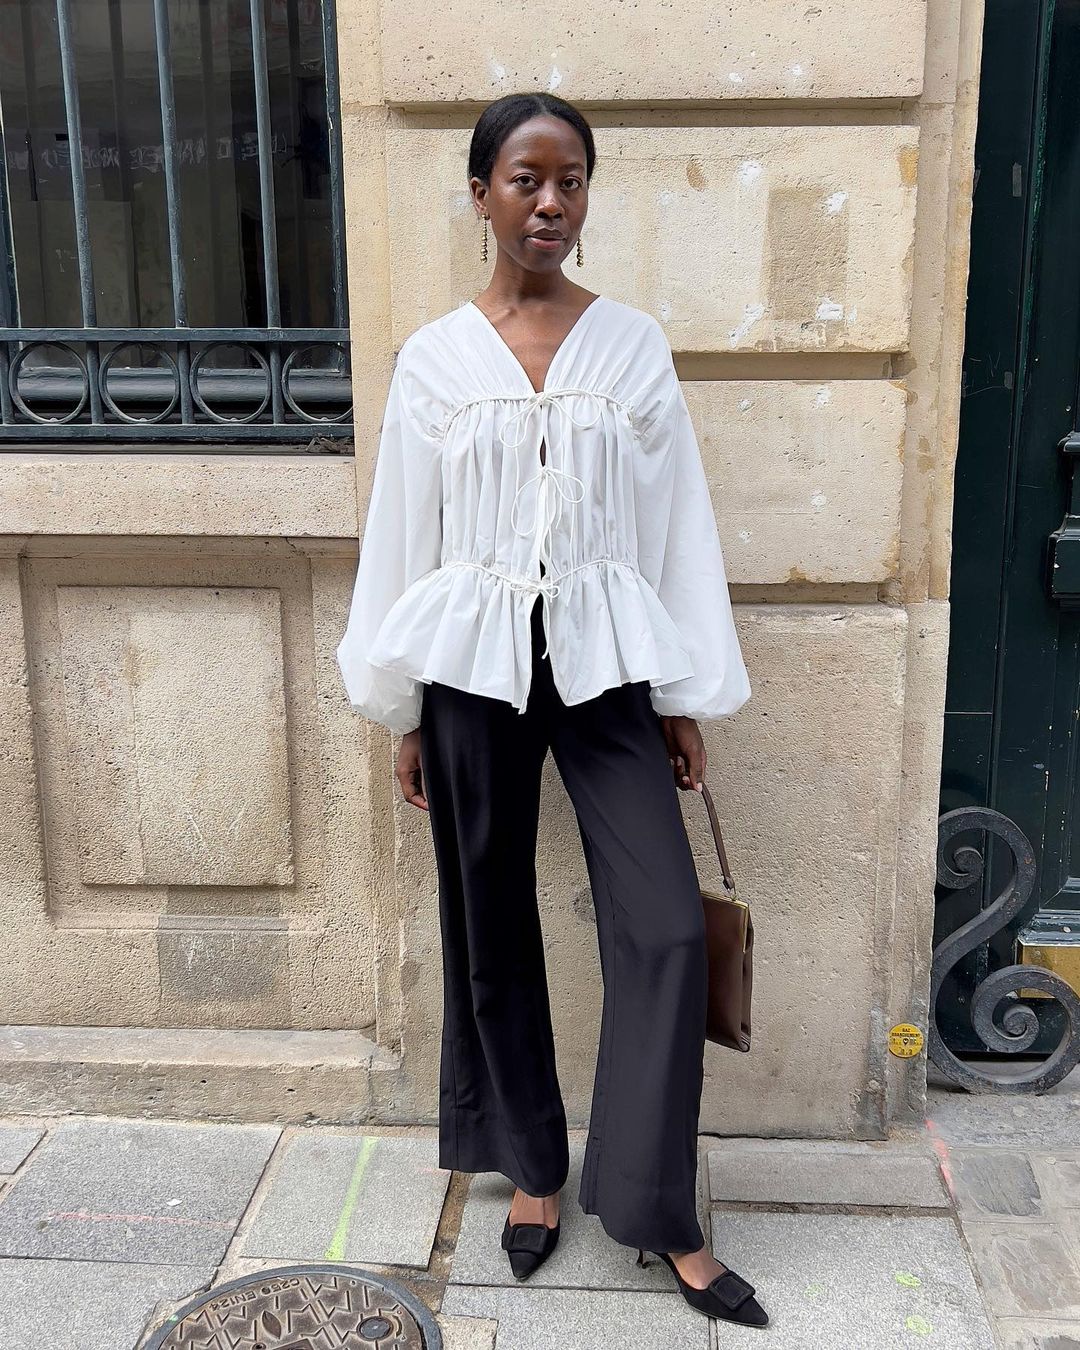 @sylviemus_ wearing dangling earrings with trousers and shirt